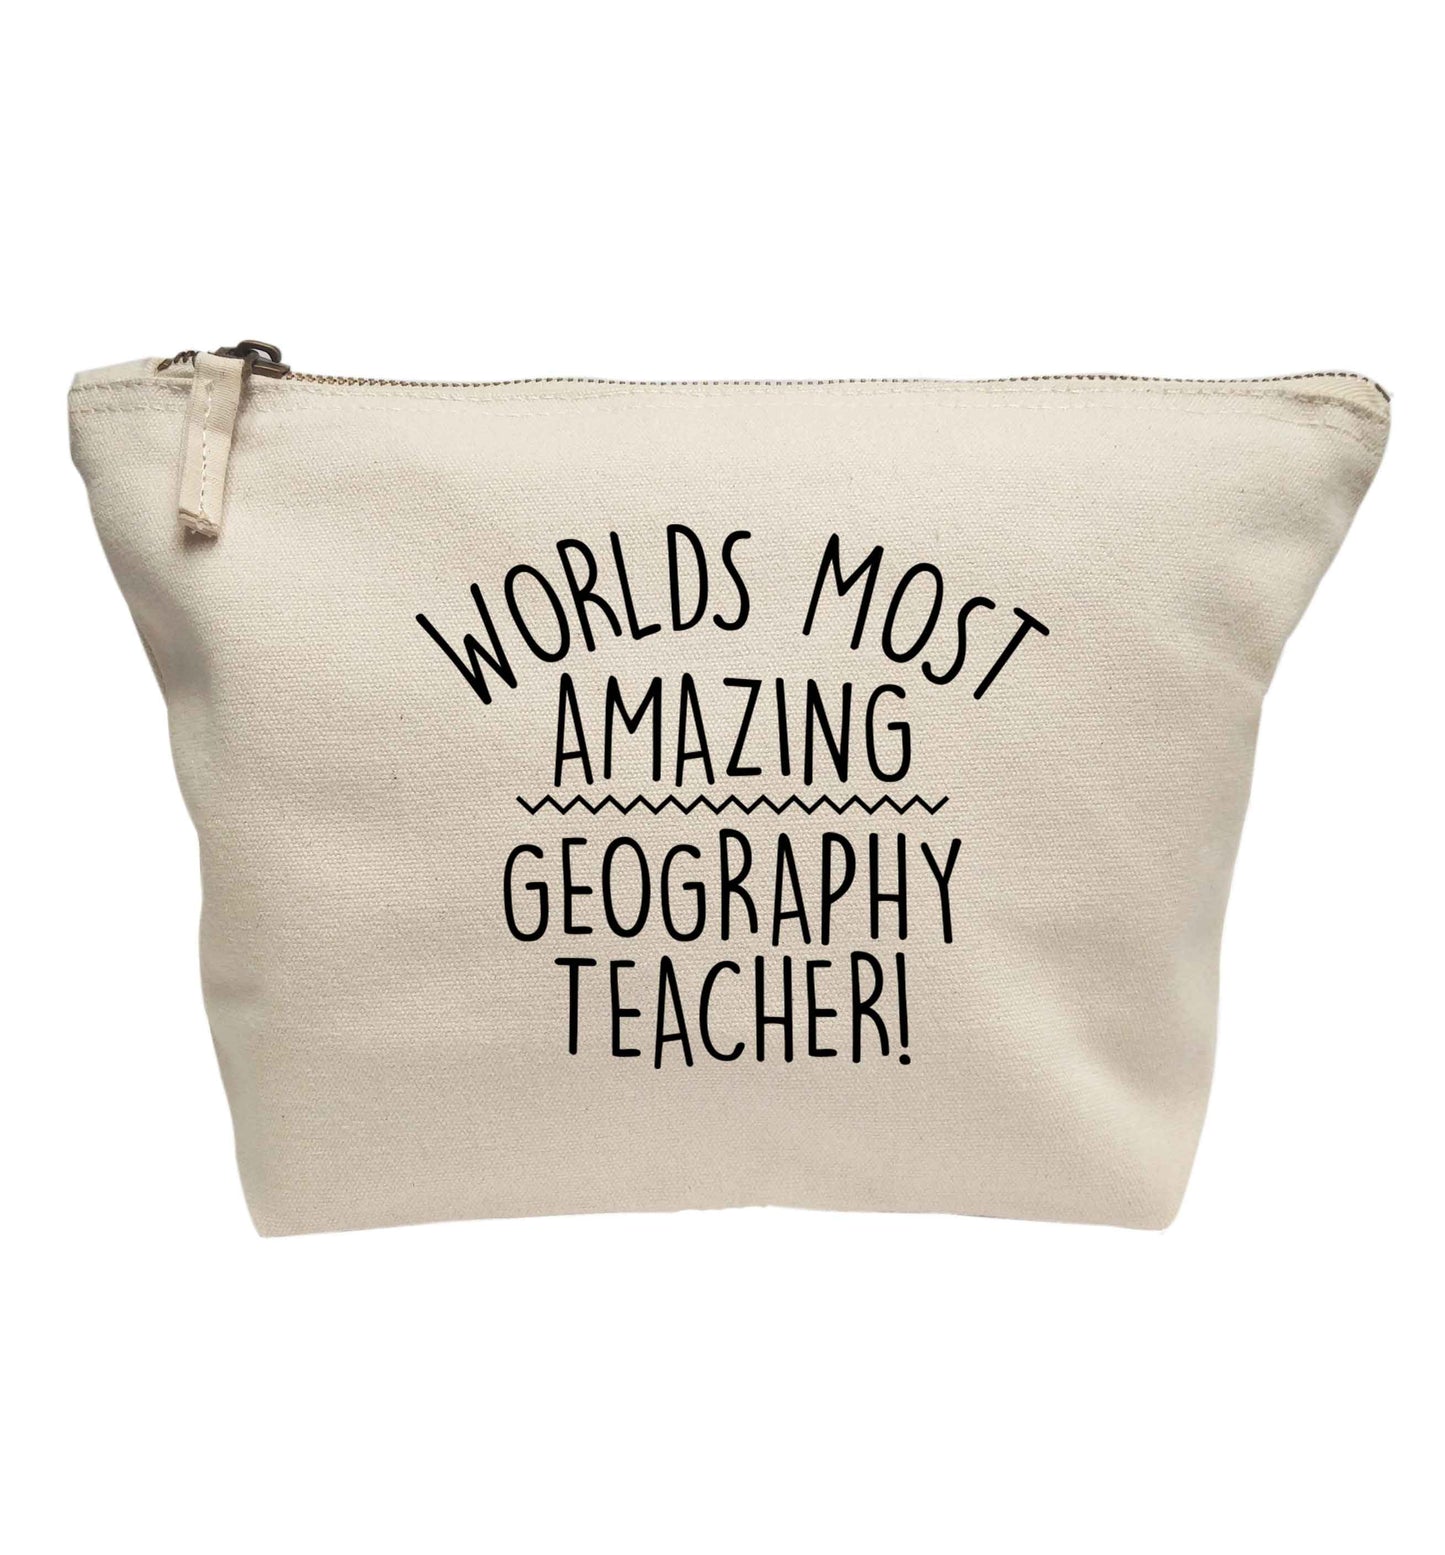 Worlds most amazing geography teacher | Makeup / wash bag